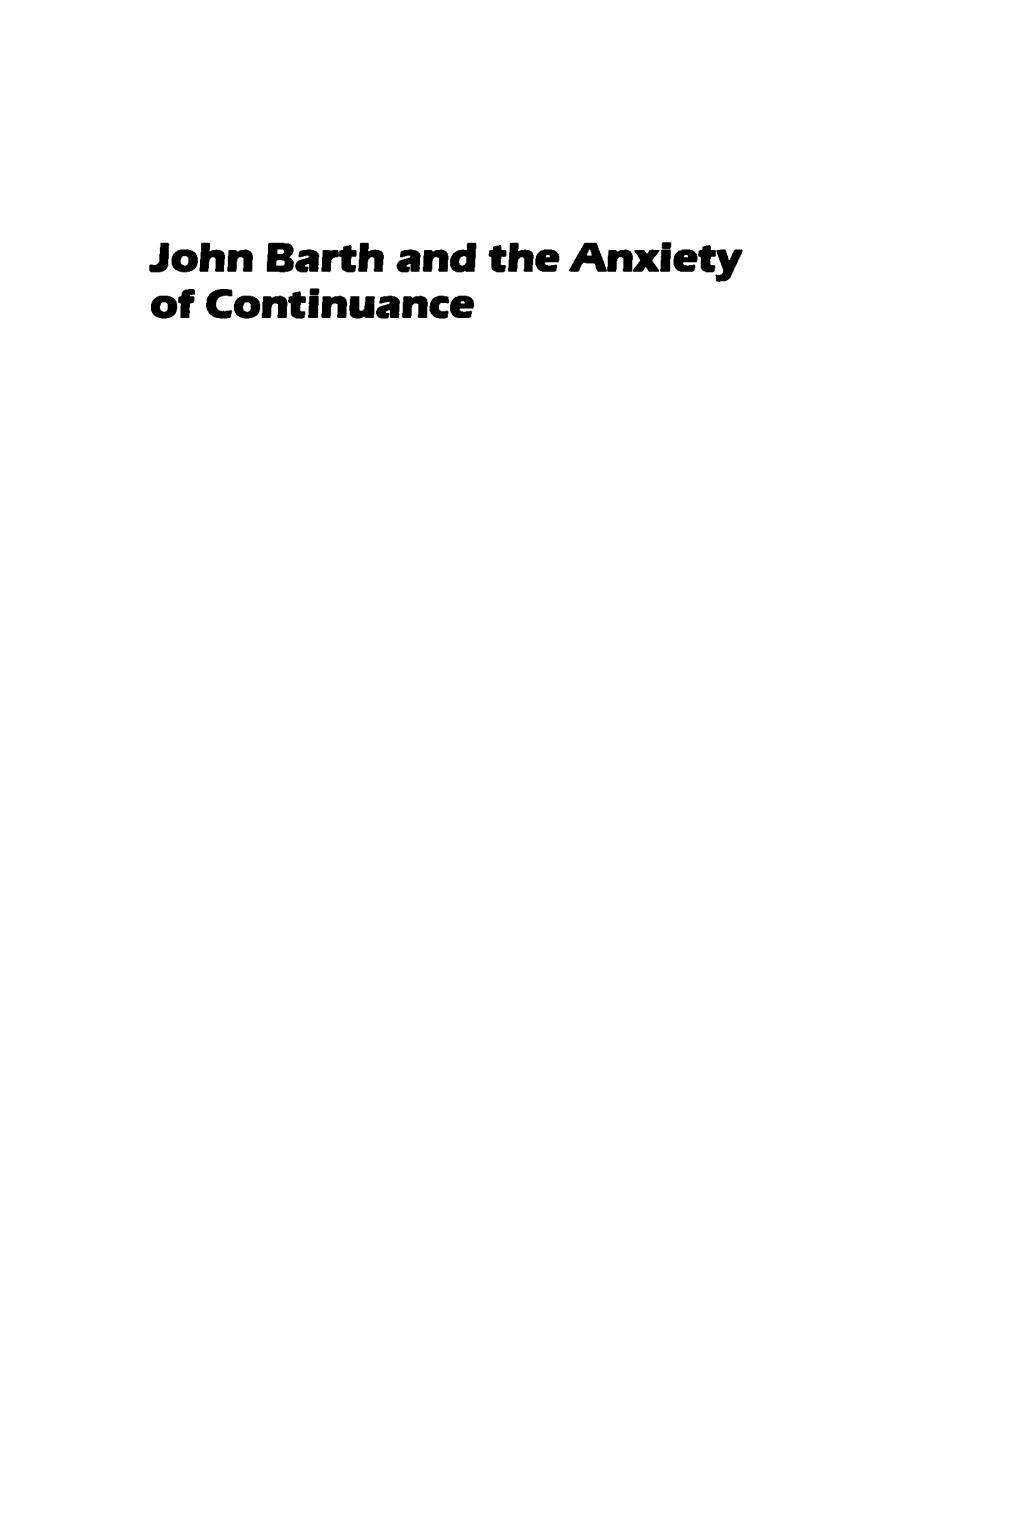 John Barth and the Anxiety of Continuance Penn Studies in Contemporary American Fiction a Series Edited by Emoiy Elliott, University of California at Riverside